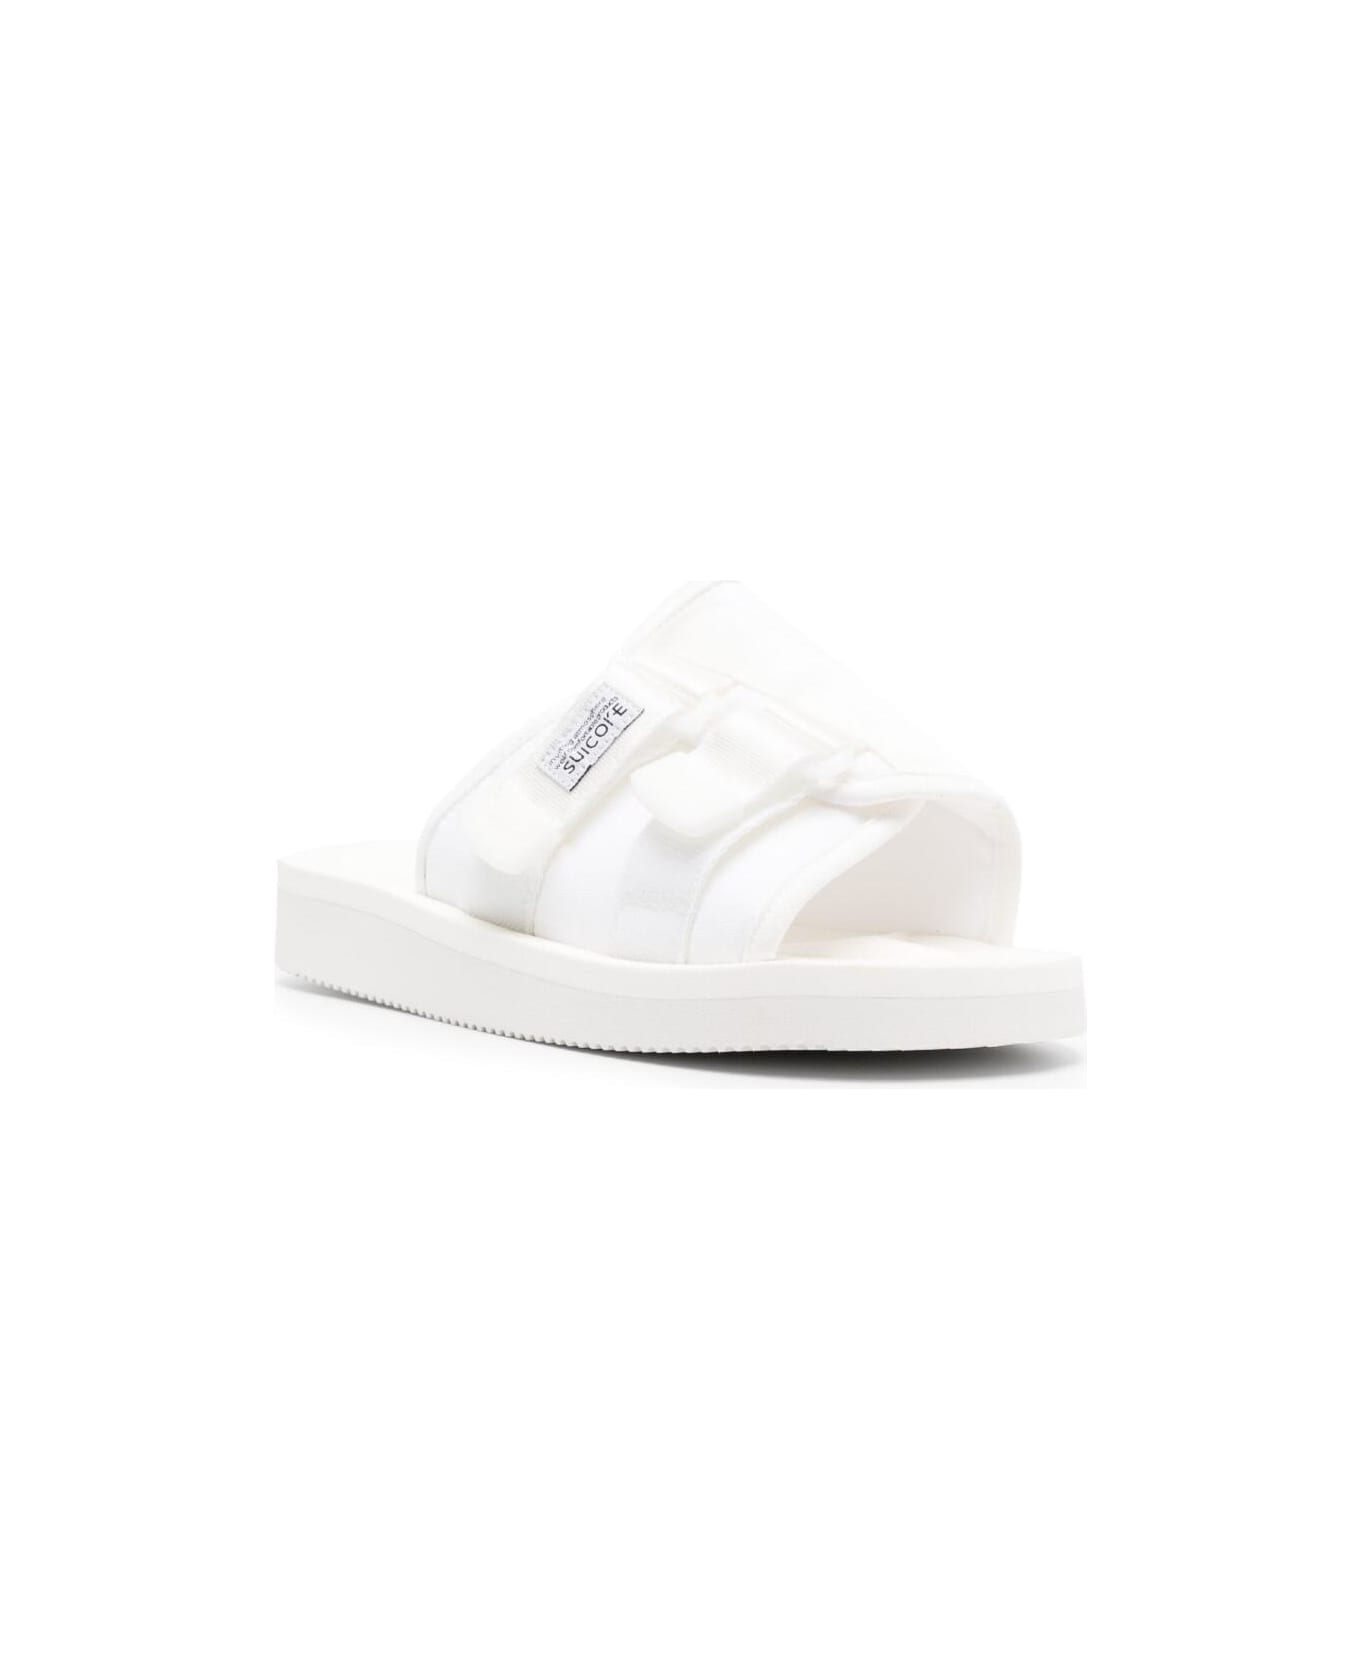 SUICOKE 'kaw-cab' White Sandals With Velcro Fastening In Nylon Woman Suicoke - White サンダル